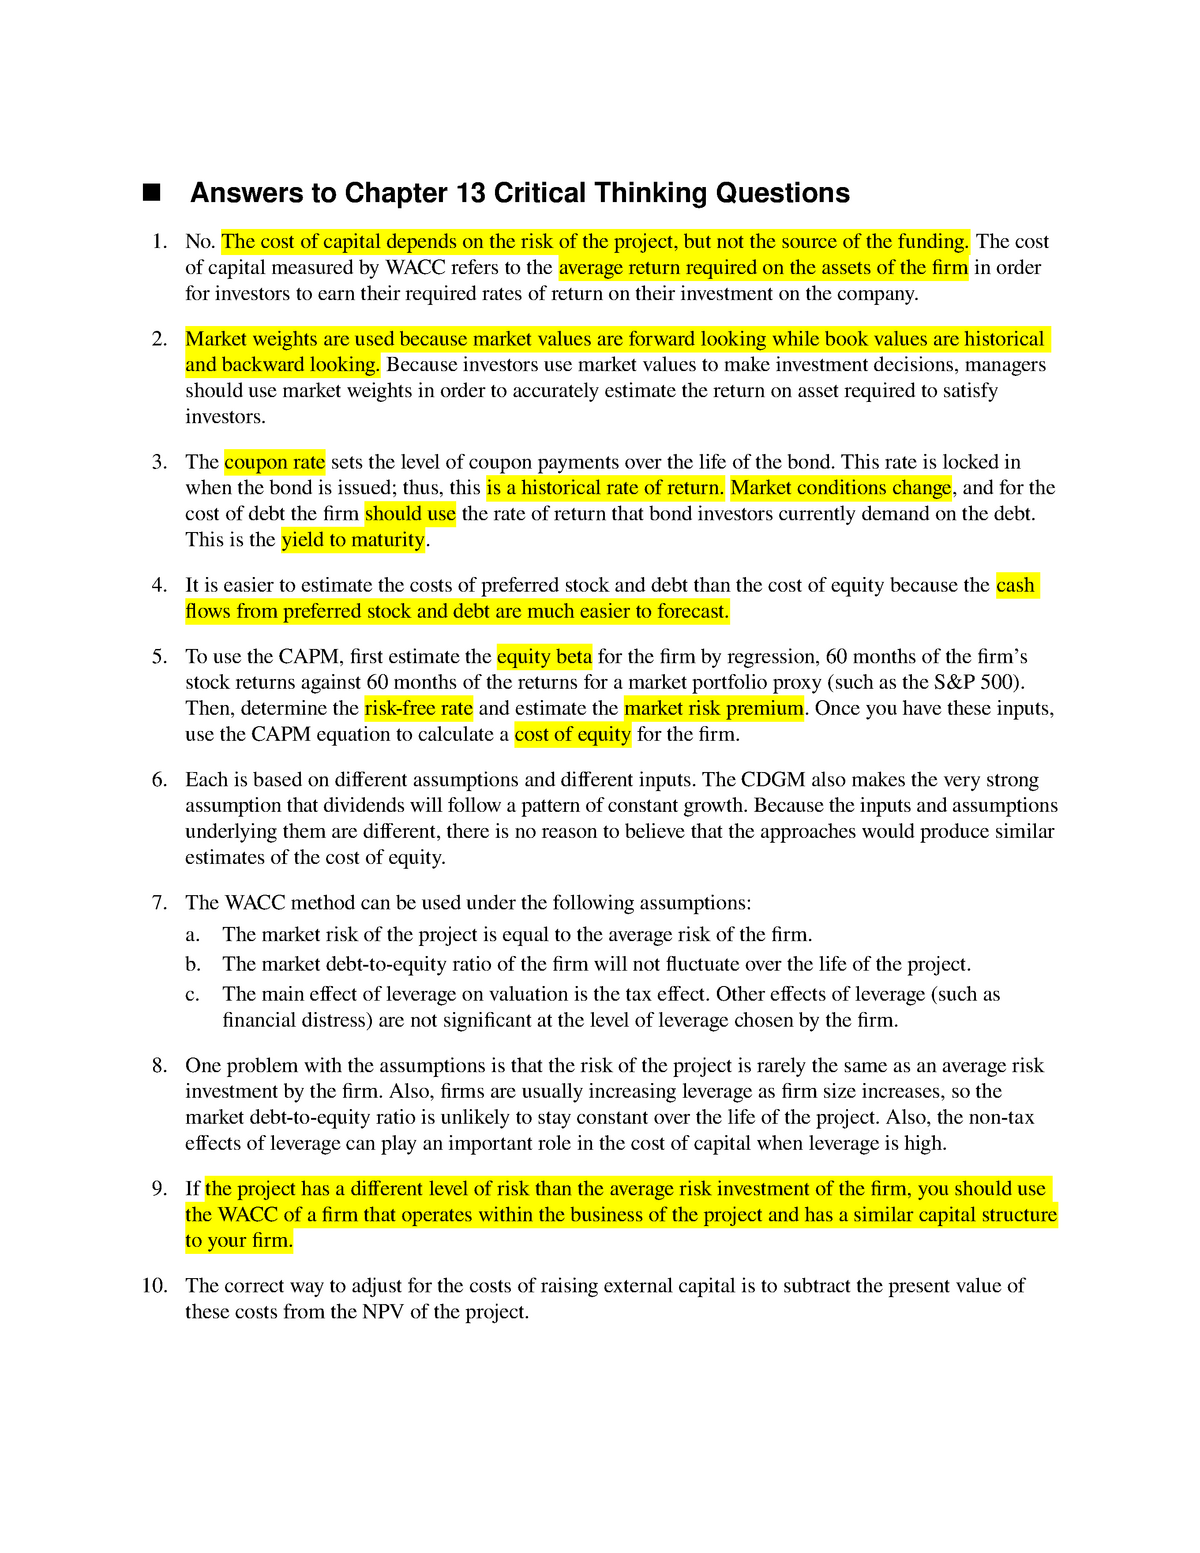 chapter 13 critical thinking answers